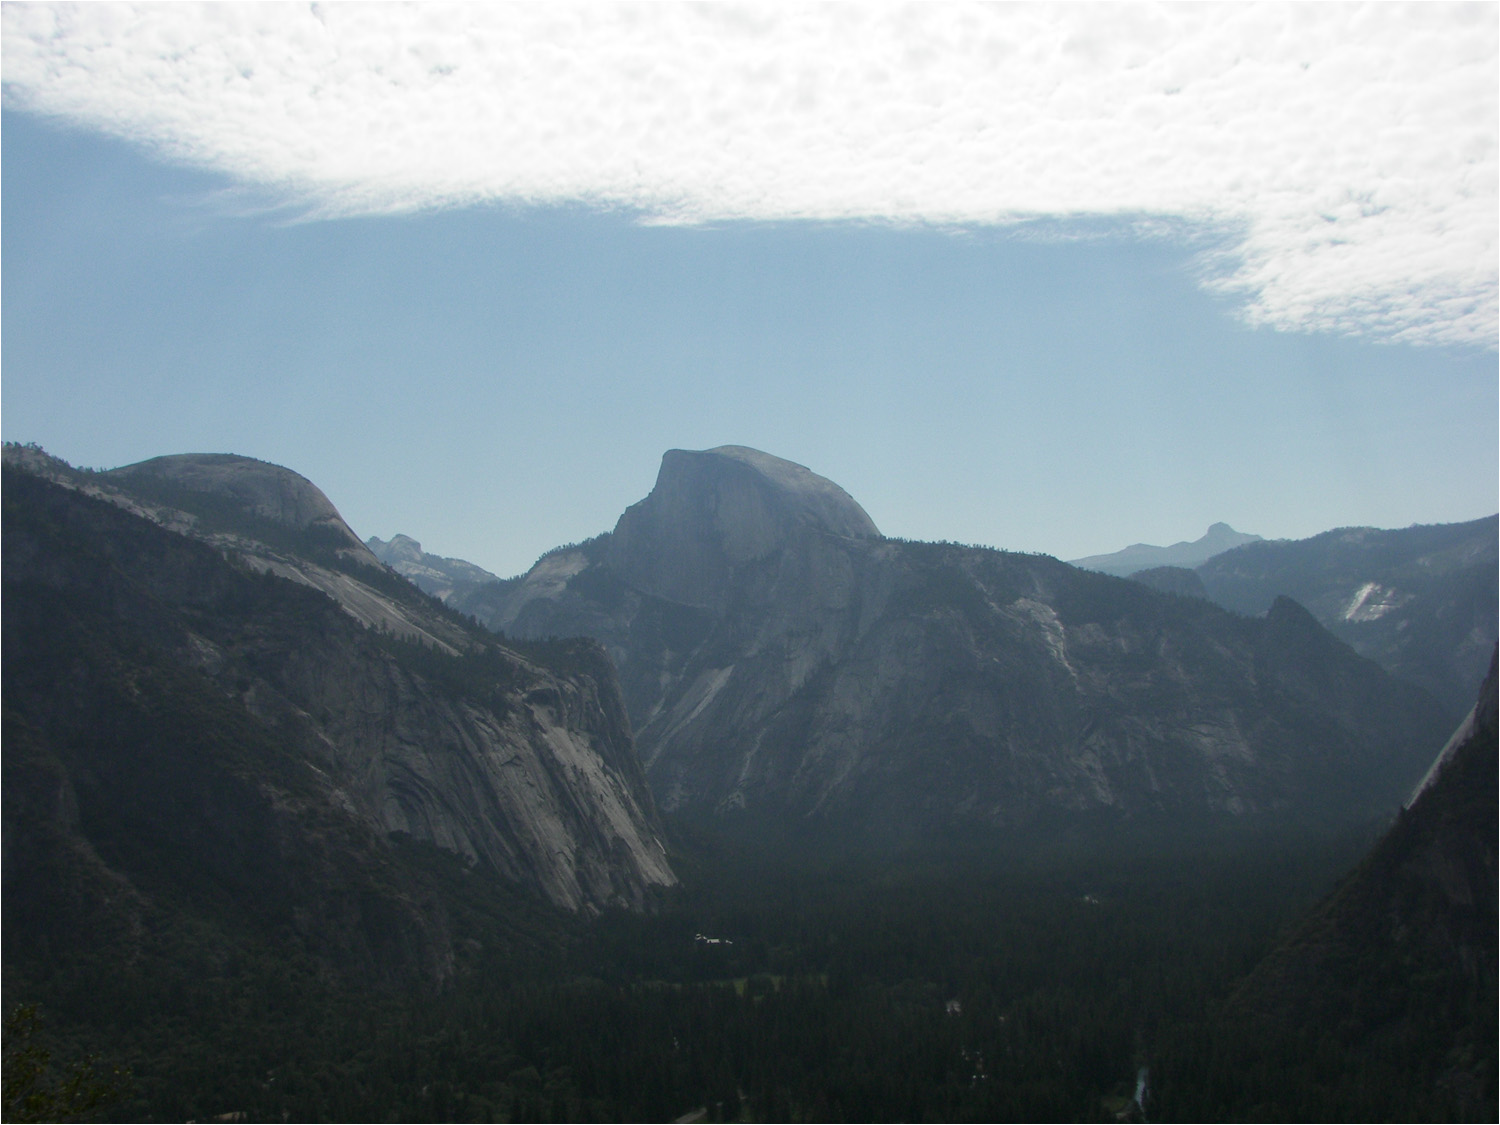 Upper Yosemite Falls Hike- View of Half Dome from trail